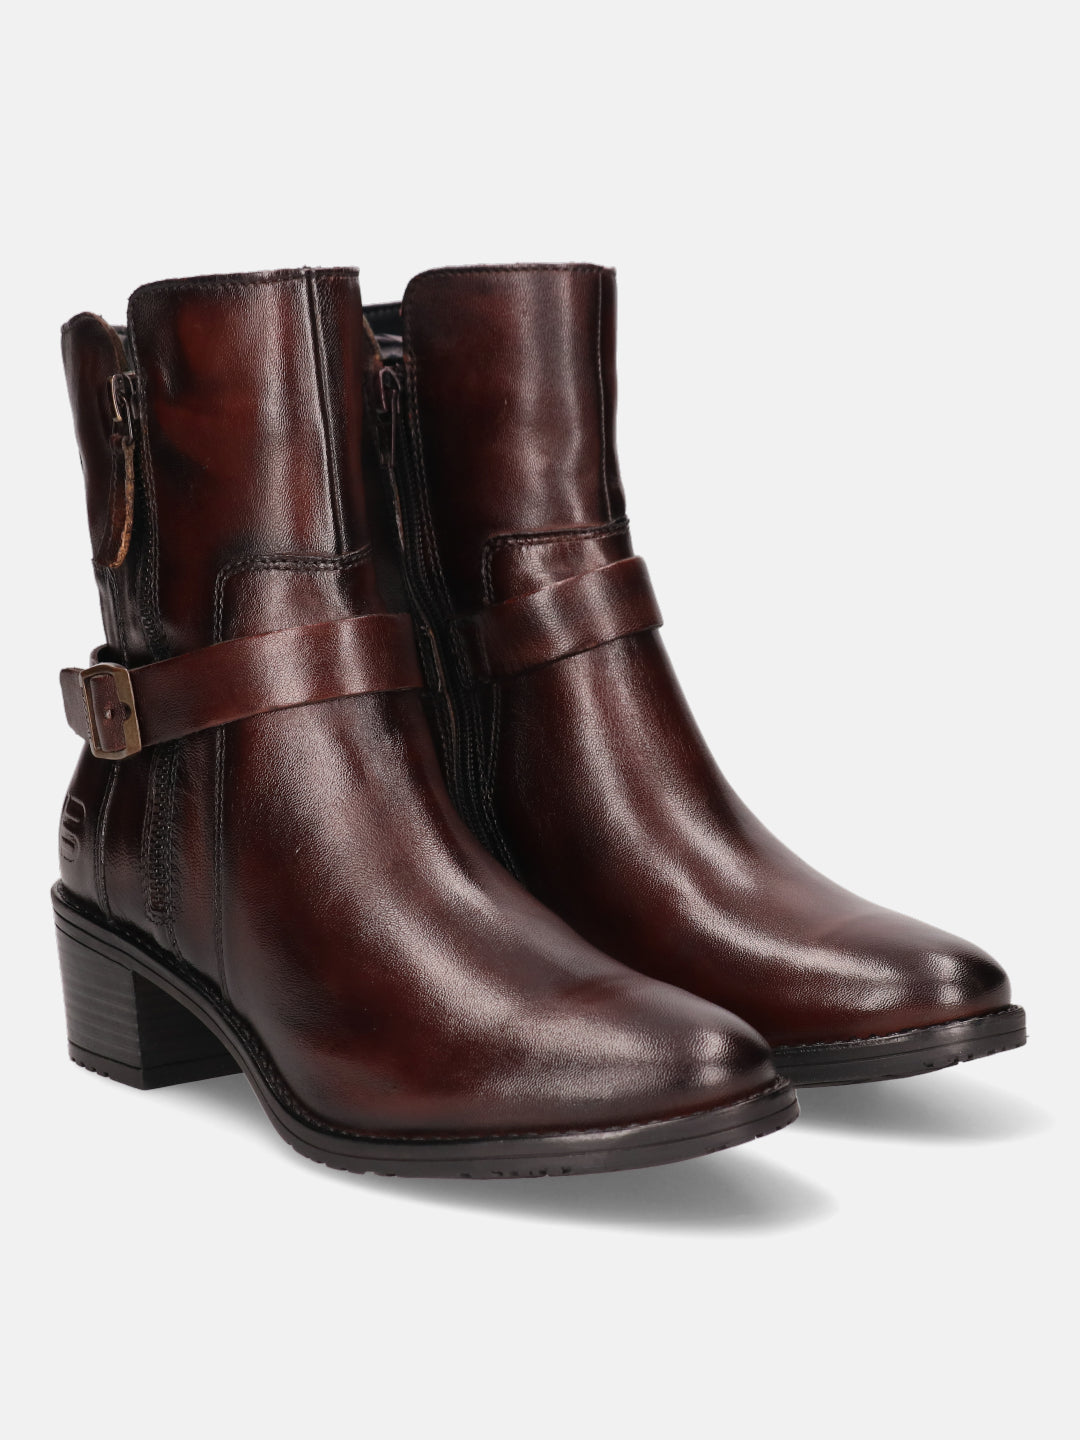 Ruby Bordo Leather Ankle Boots